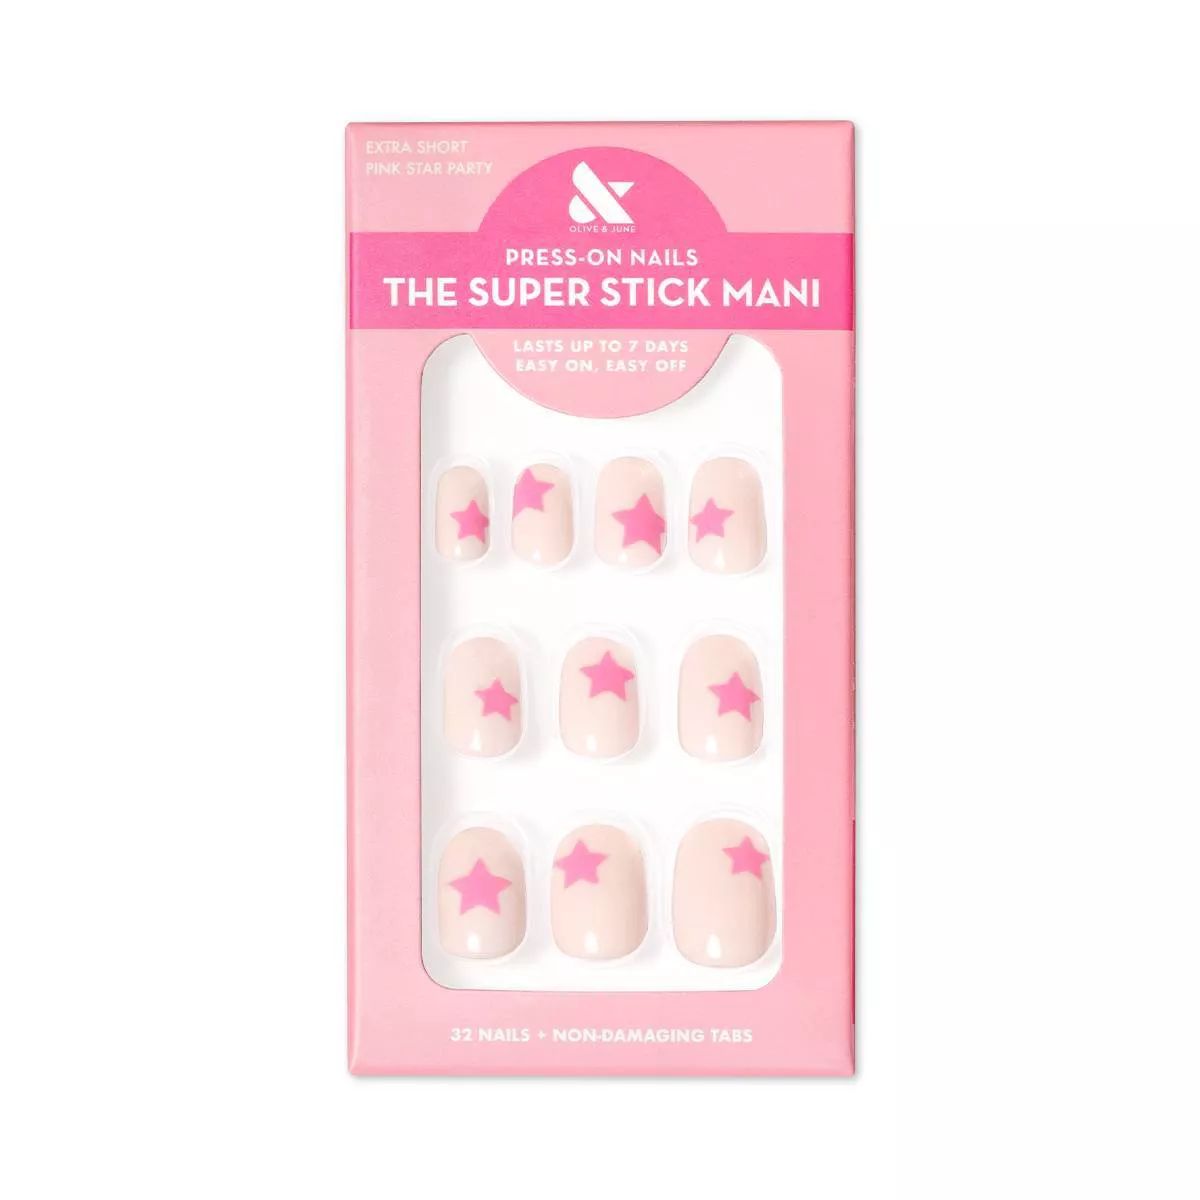 Olive & June Fake Nails - XS Round - Pink Star Party - 32ct | Target